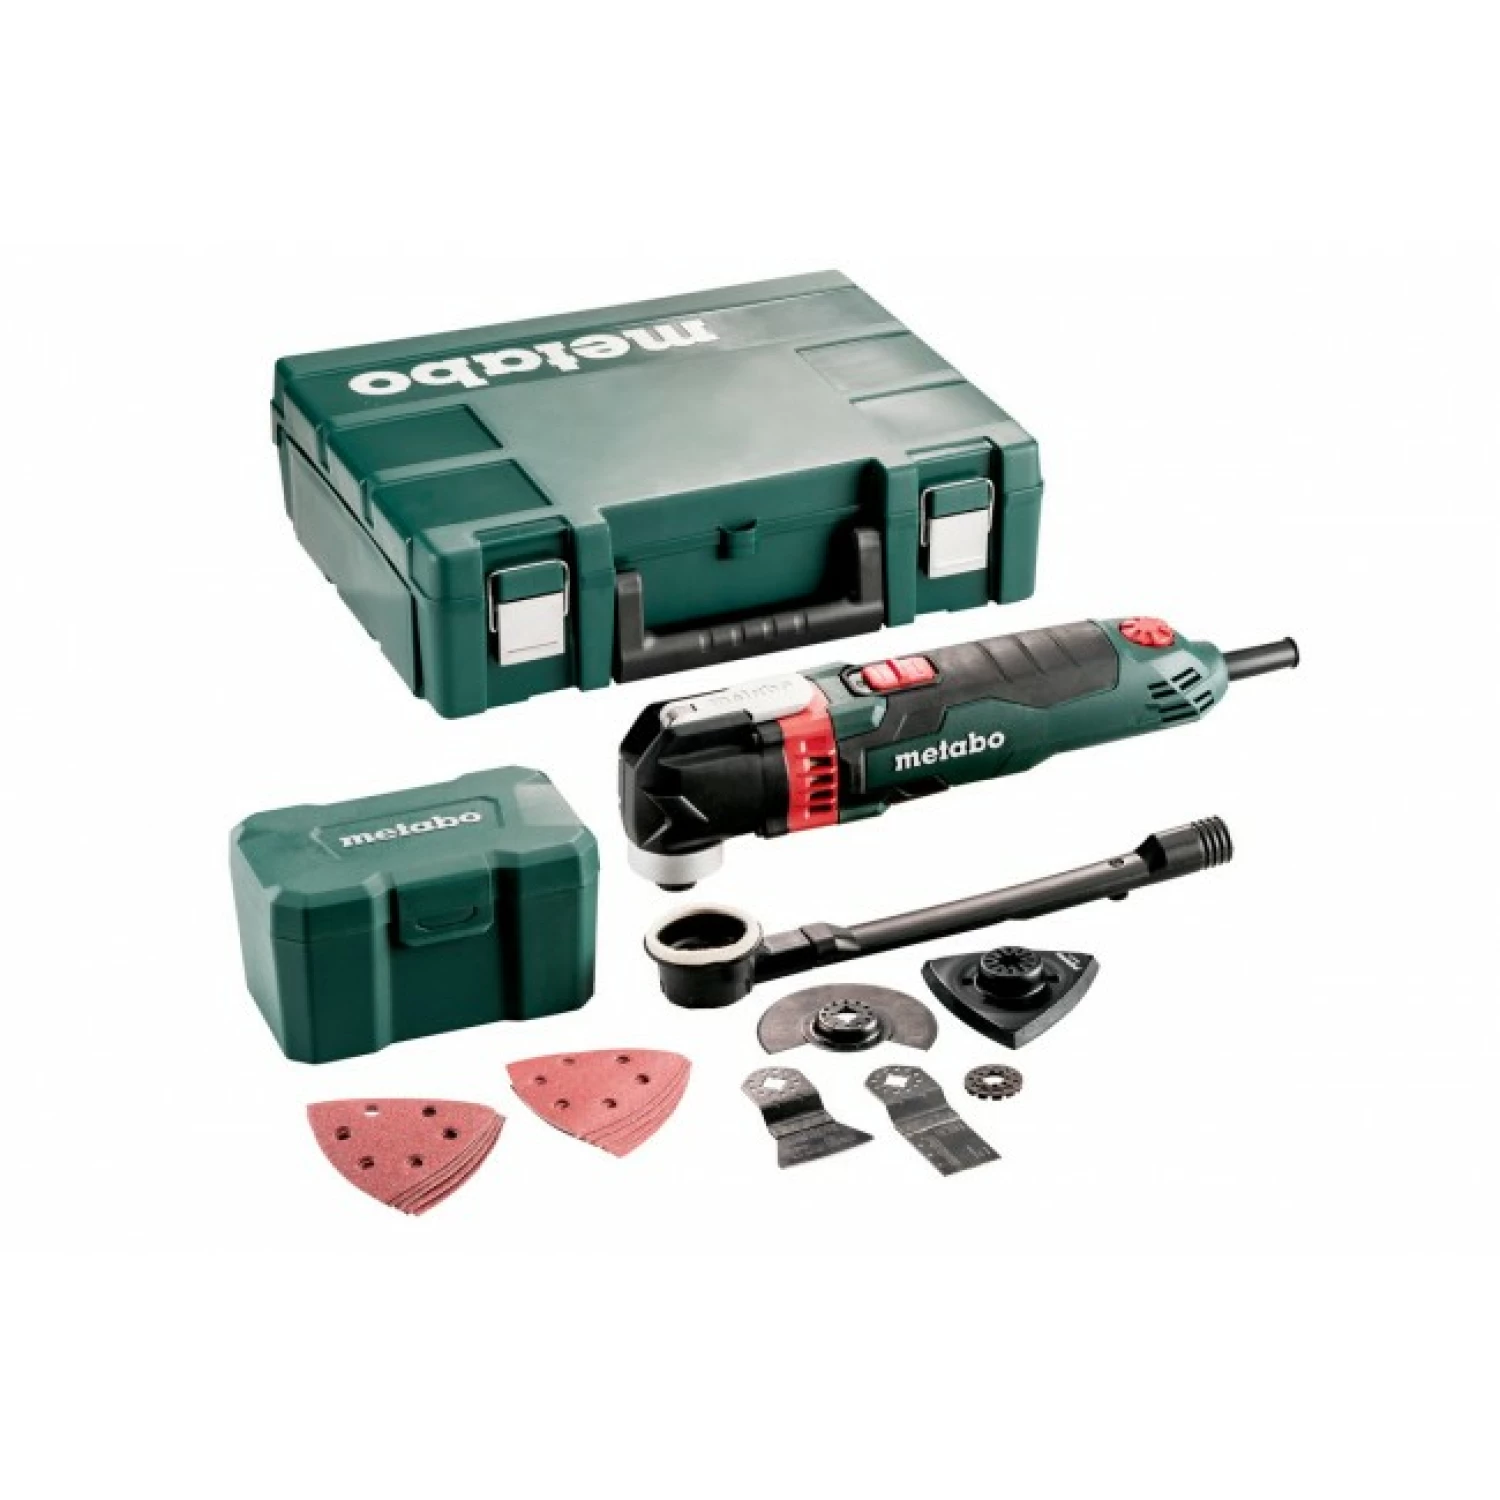 Metabo MT 400 Quick Multitool + 16 delige accessoireset in koffer - 400W-image